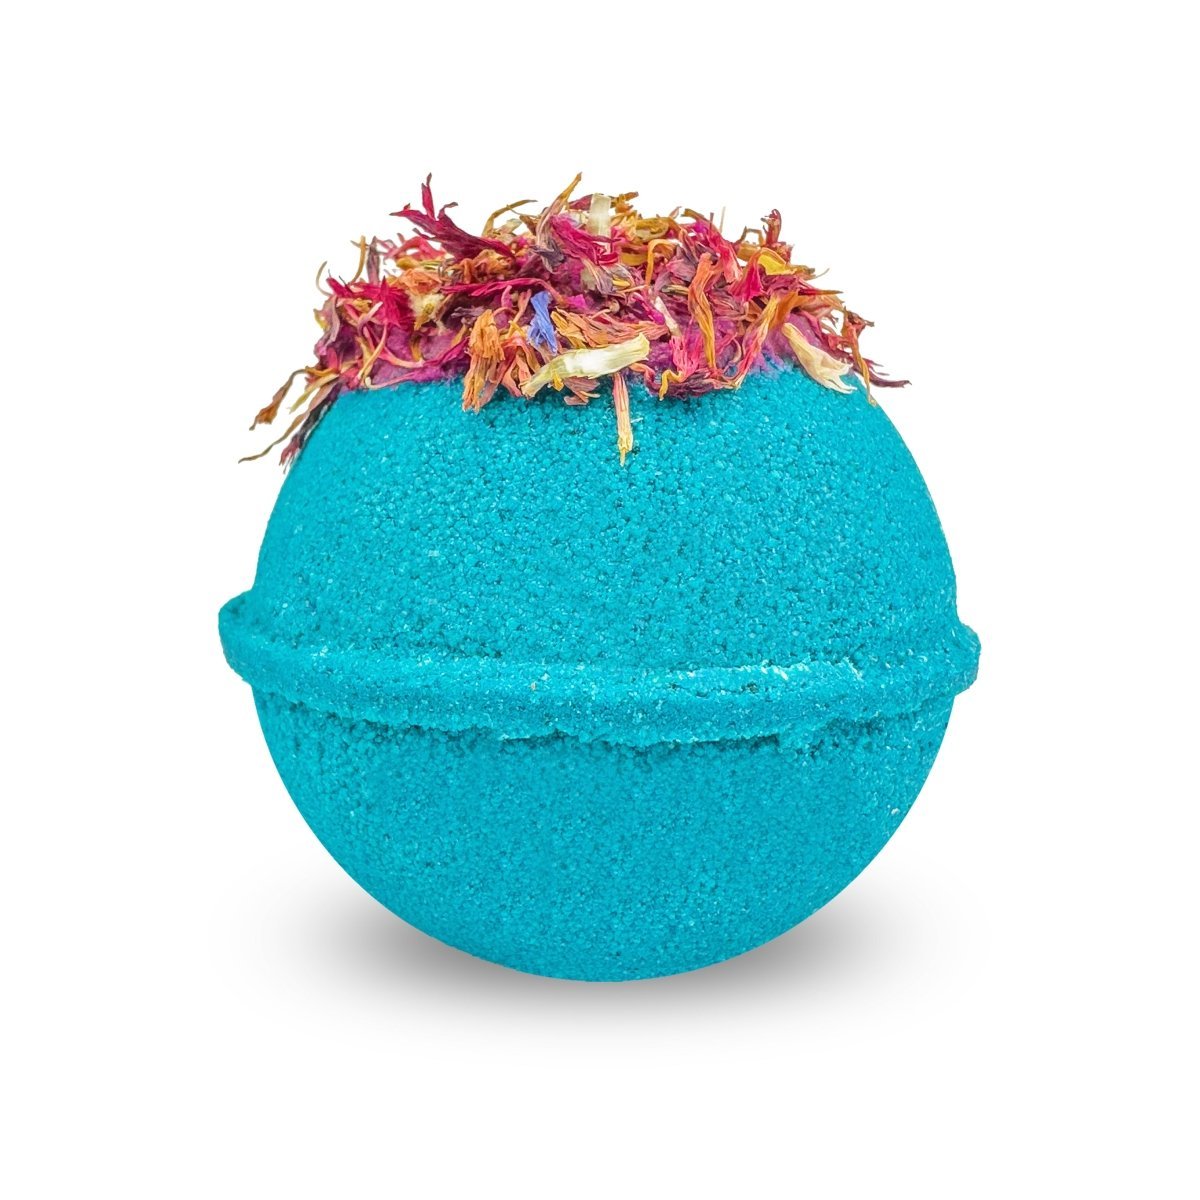 Stress Fix Bath Bomb for Kids & Adults - Calming Colourful Glitters & Spiced Fig Fragrance - Made in Australia by Bath Box